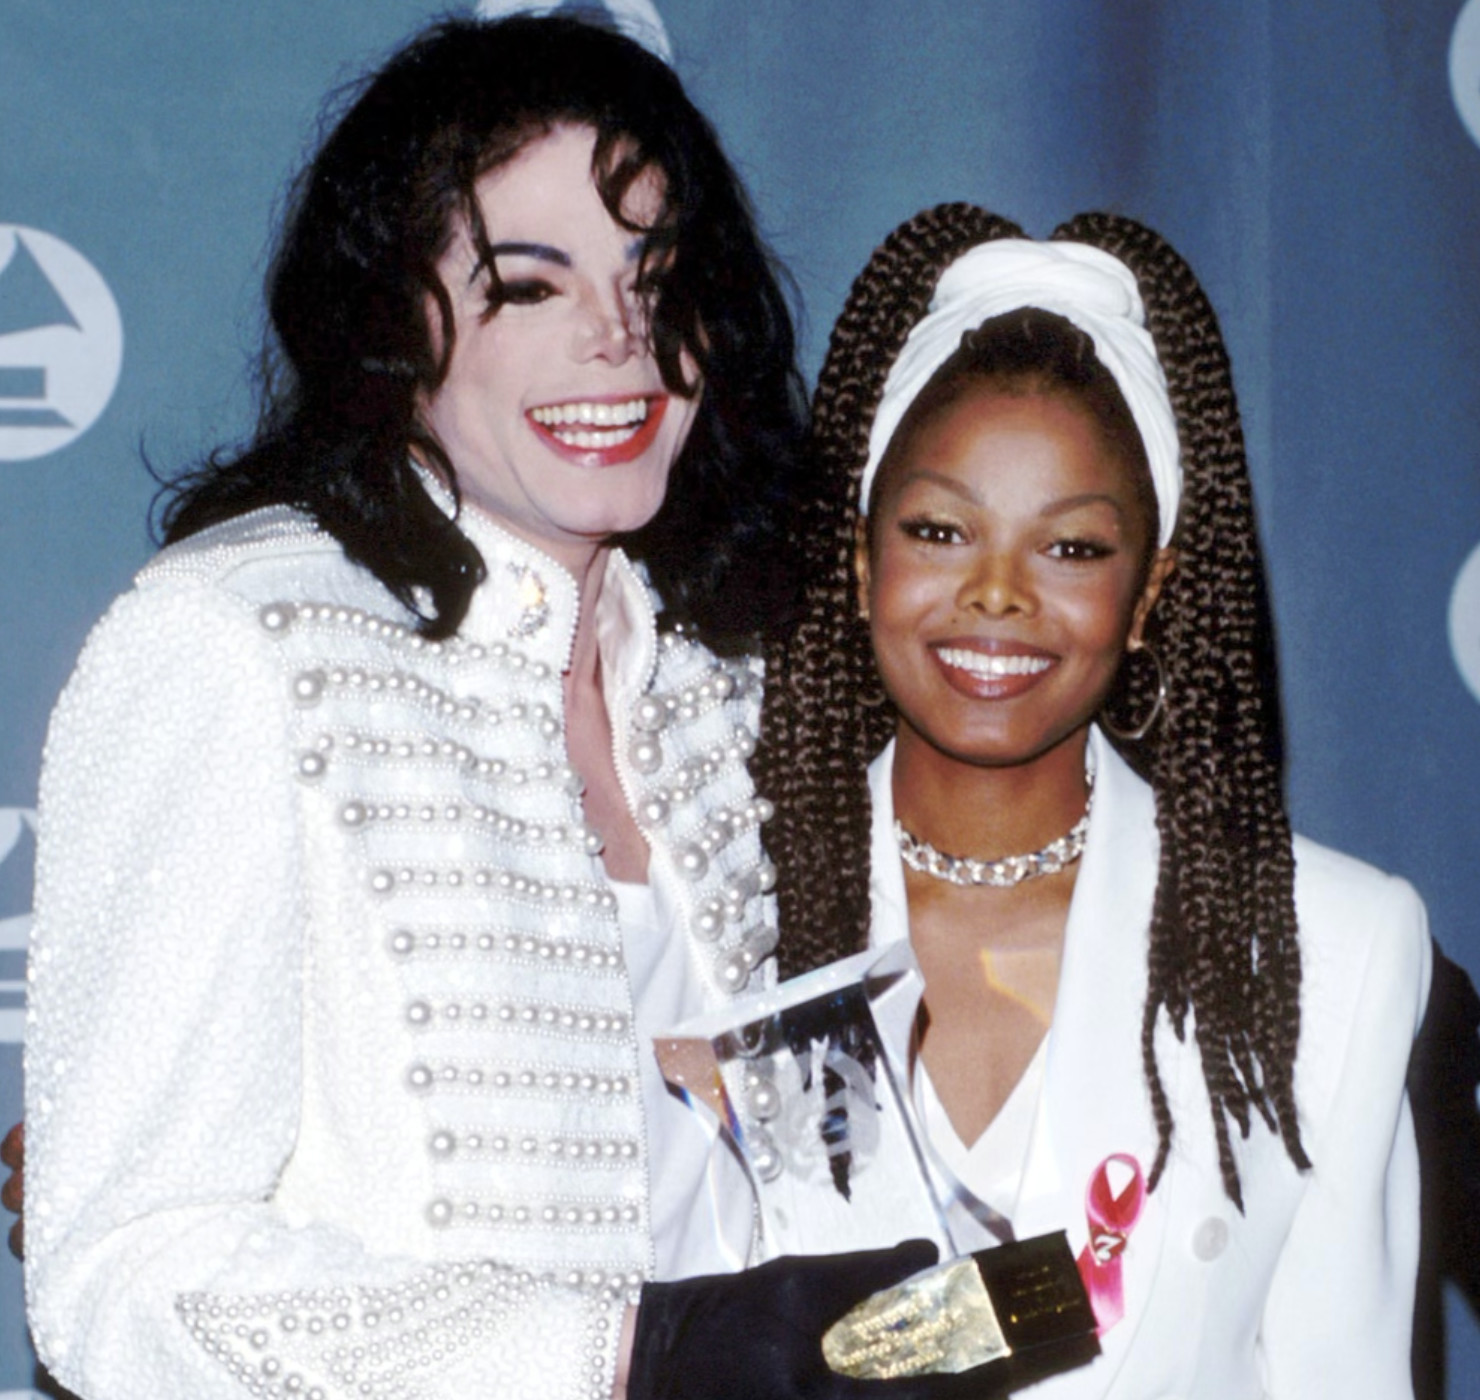 Janet Jackson Documentary Claims Michael Jackson Would Call Her Names: “Pig, Horse, Cow”